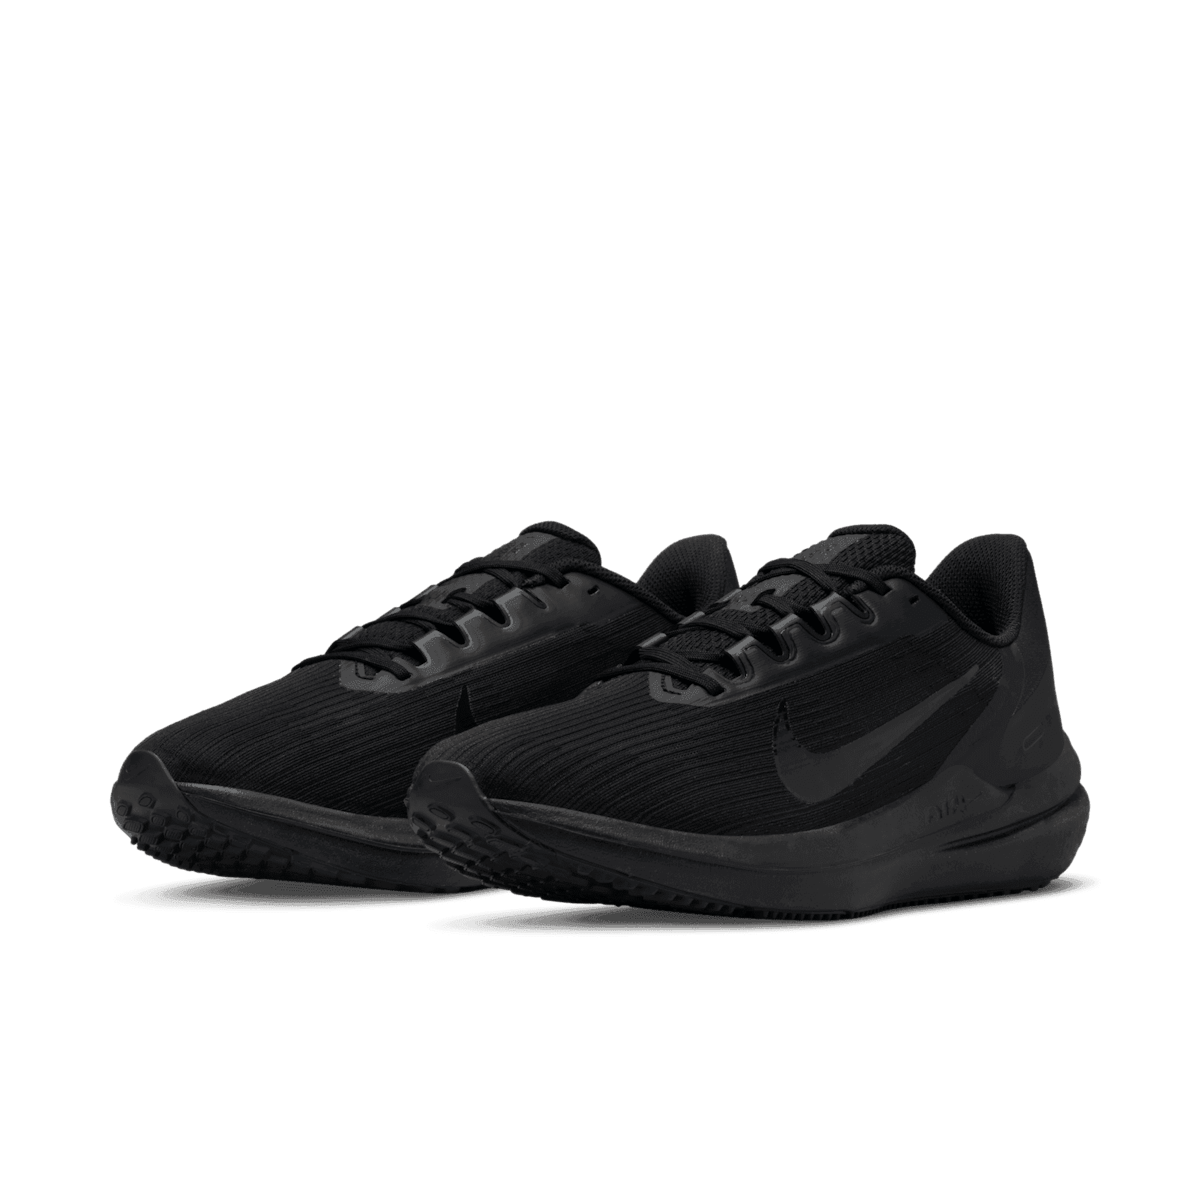 Nike Winflo 9 Road Running Shoes in Black Angle 2